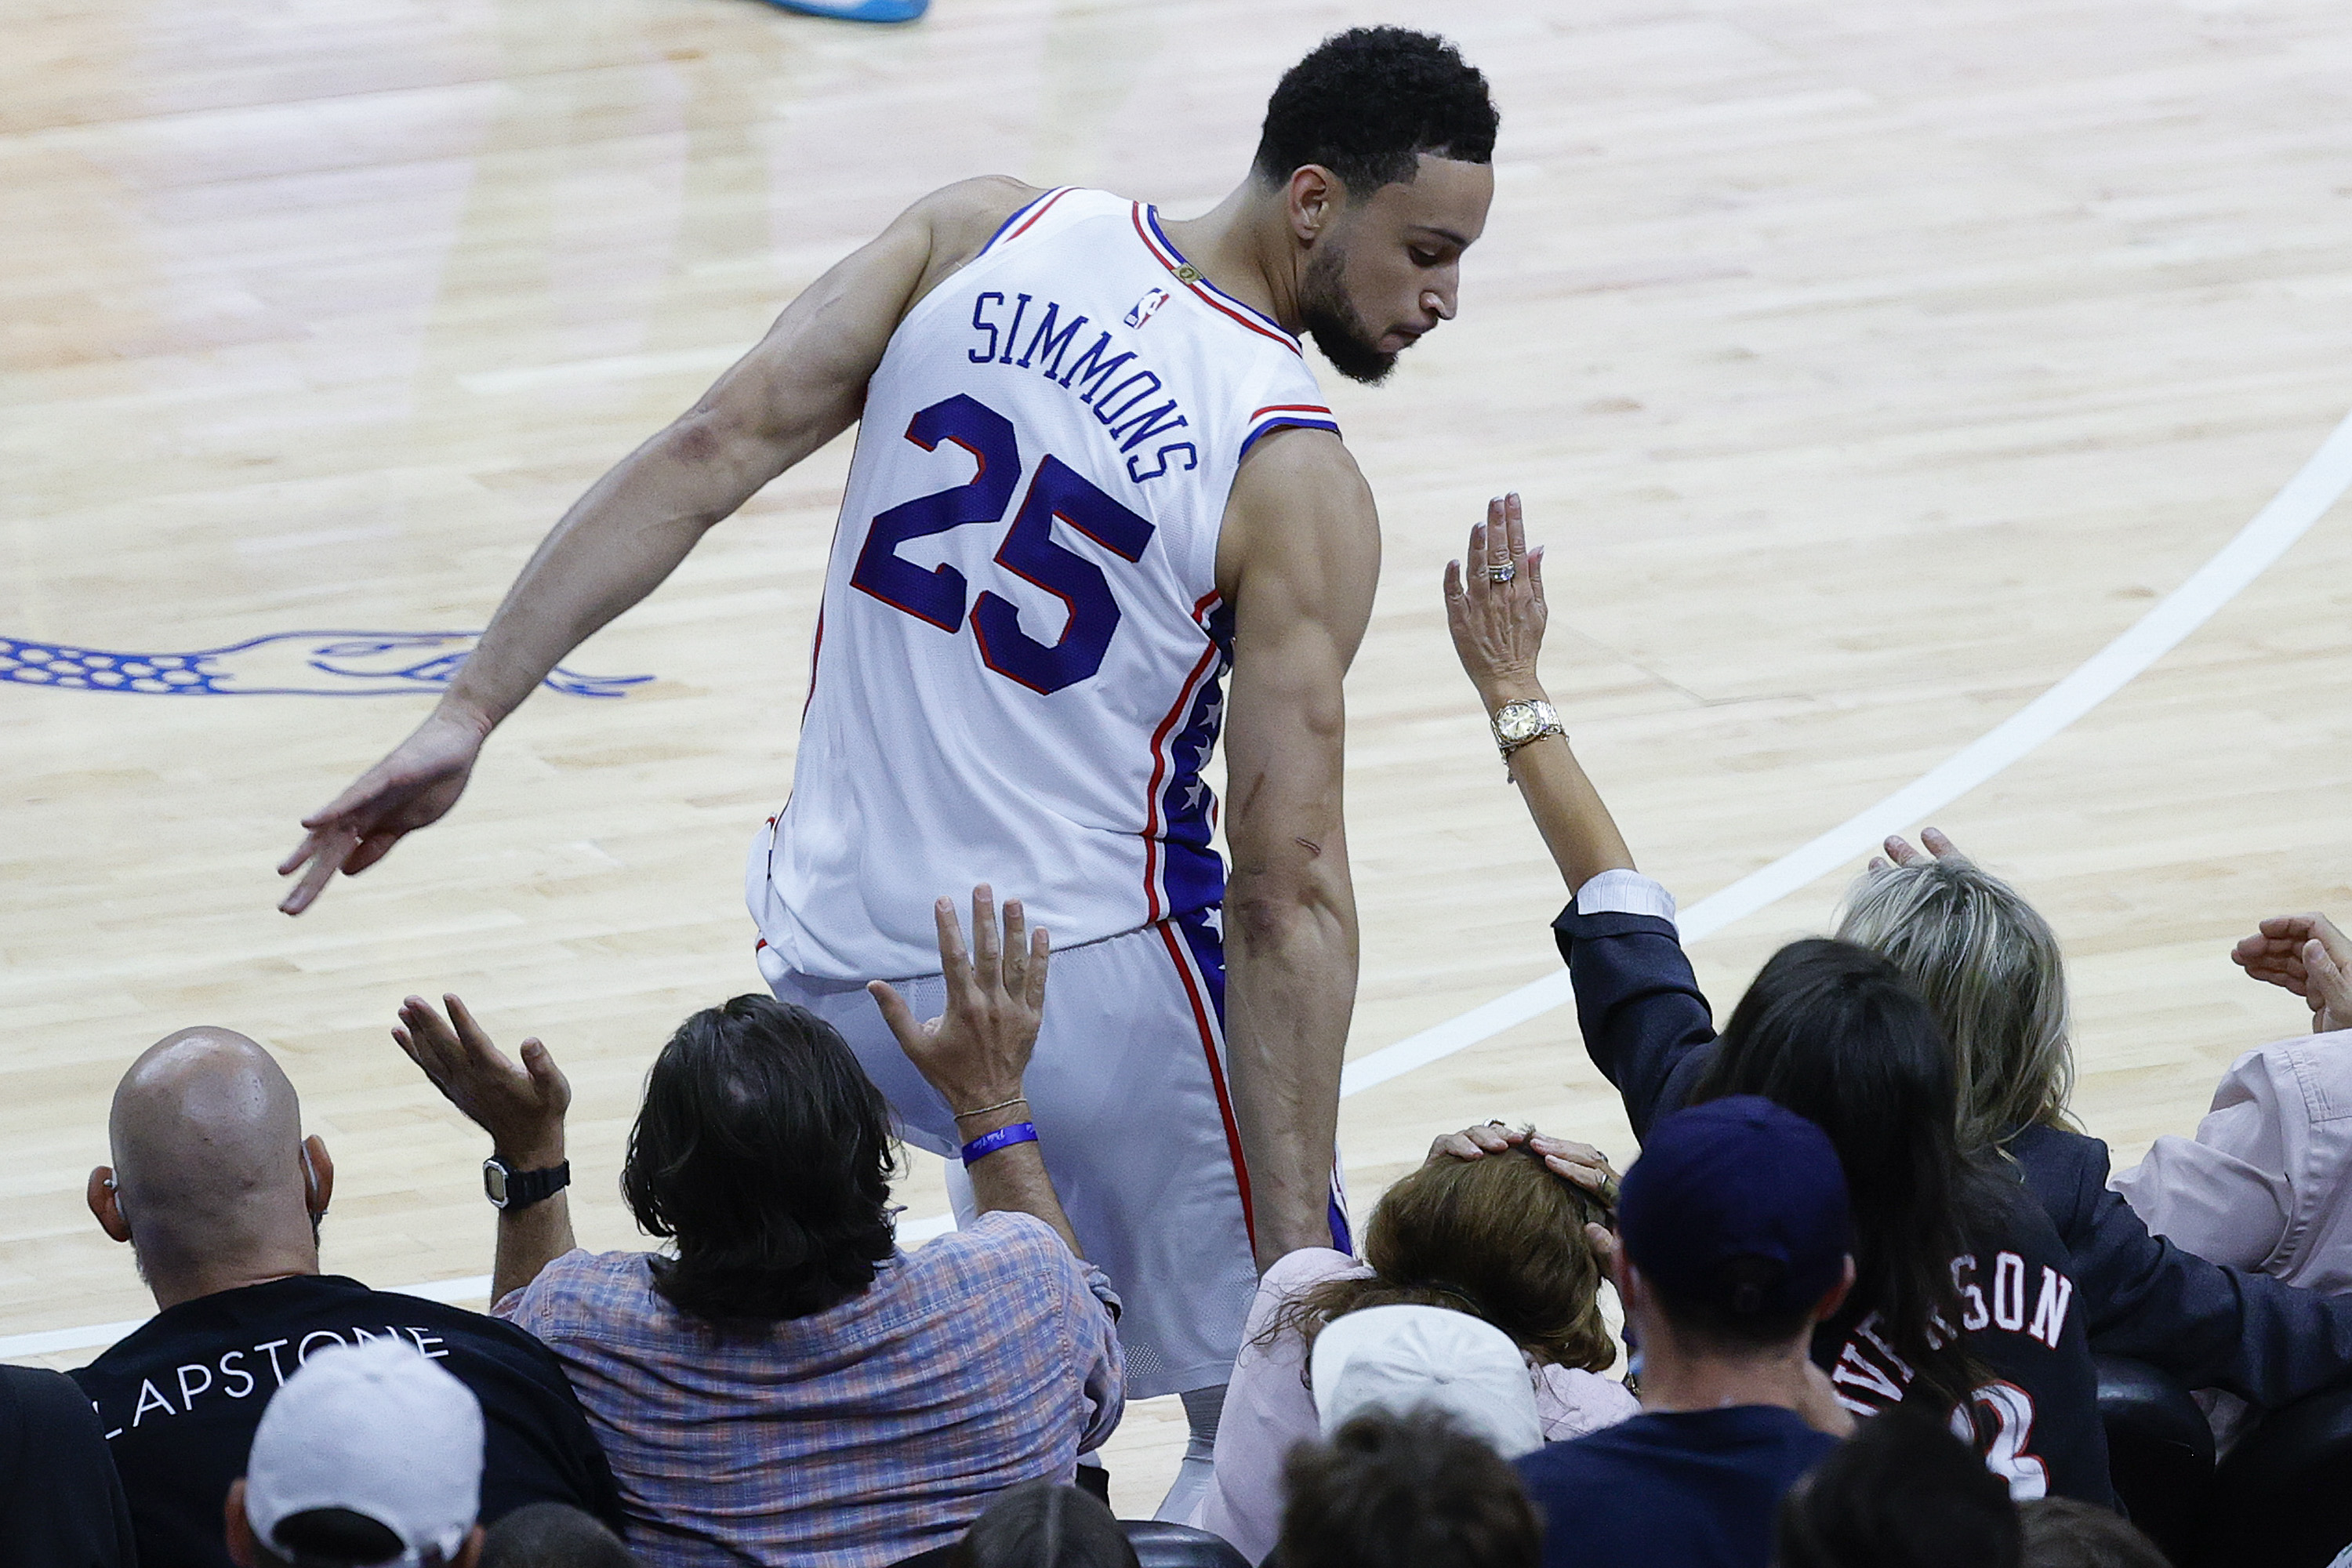 Ben Simmons Claps Back at Troll Who Made Fun of His Shooting